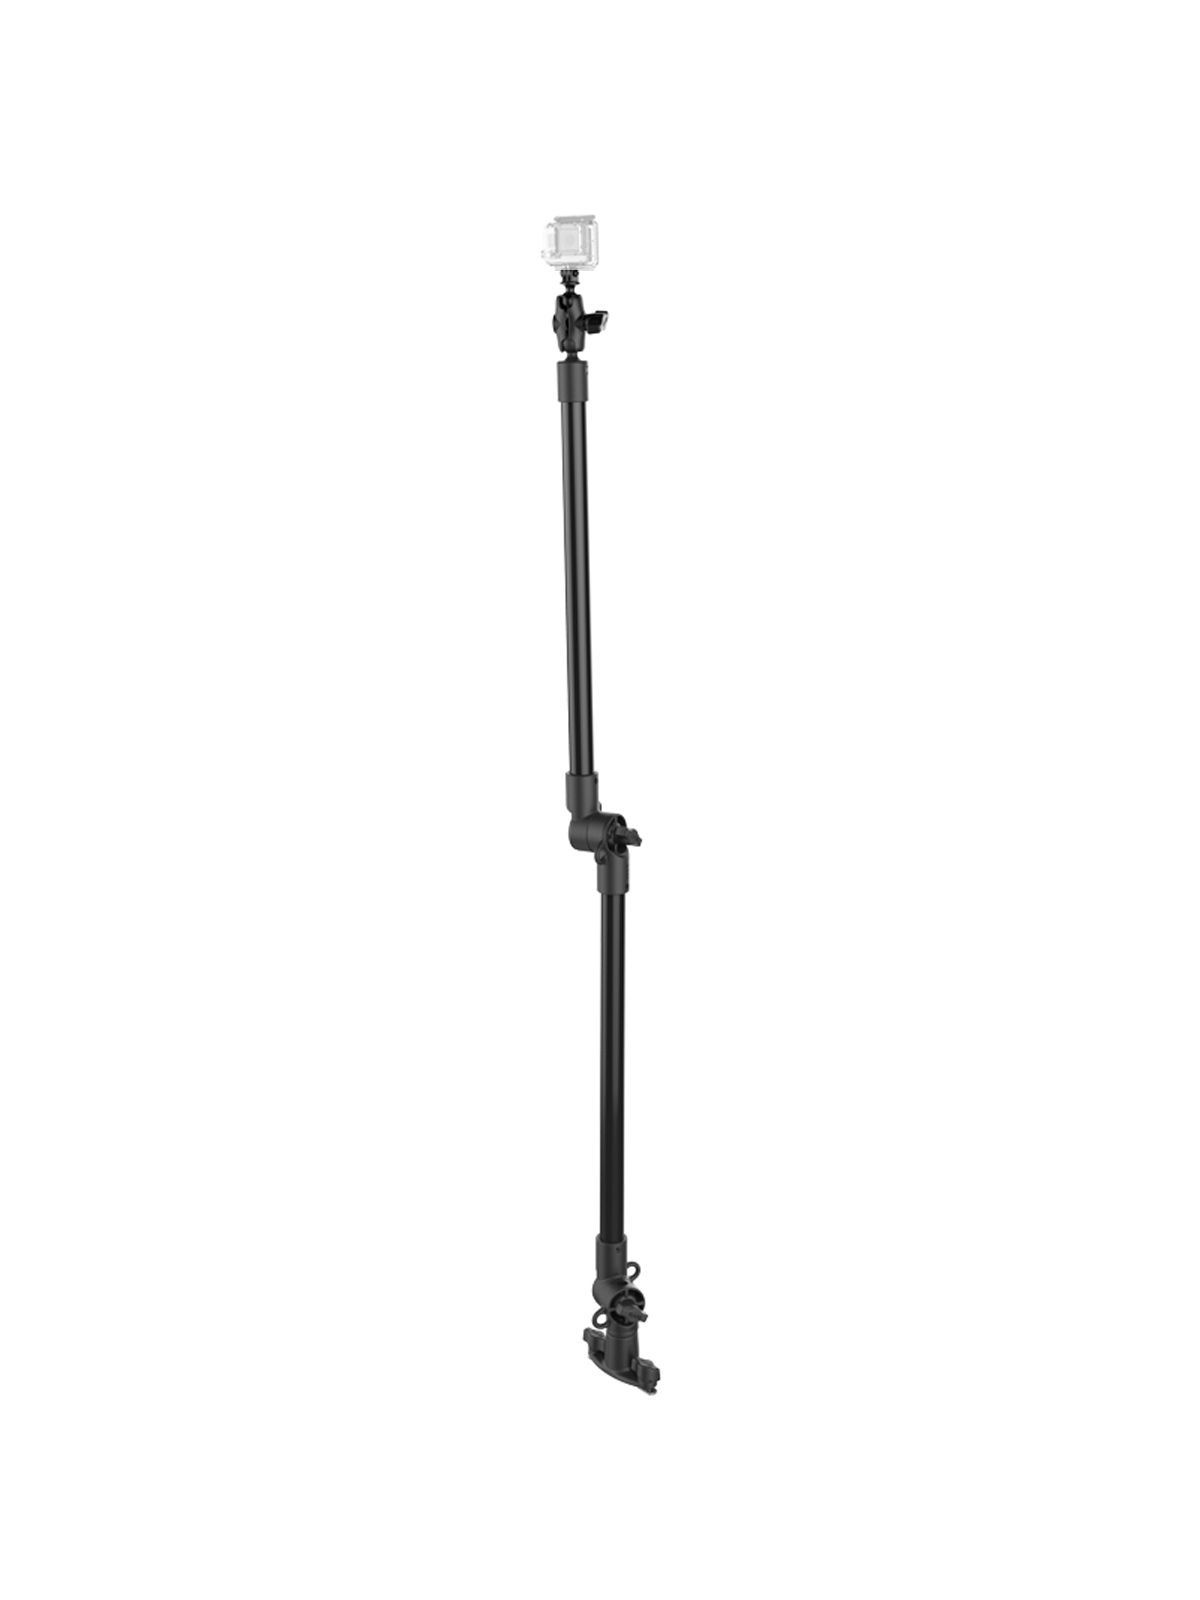 RAM® Tough-Pole™ 48" Action Camera Mount with Double Pipe & Track Base